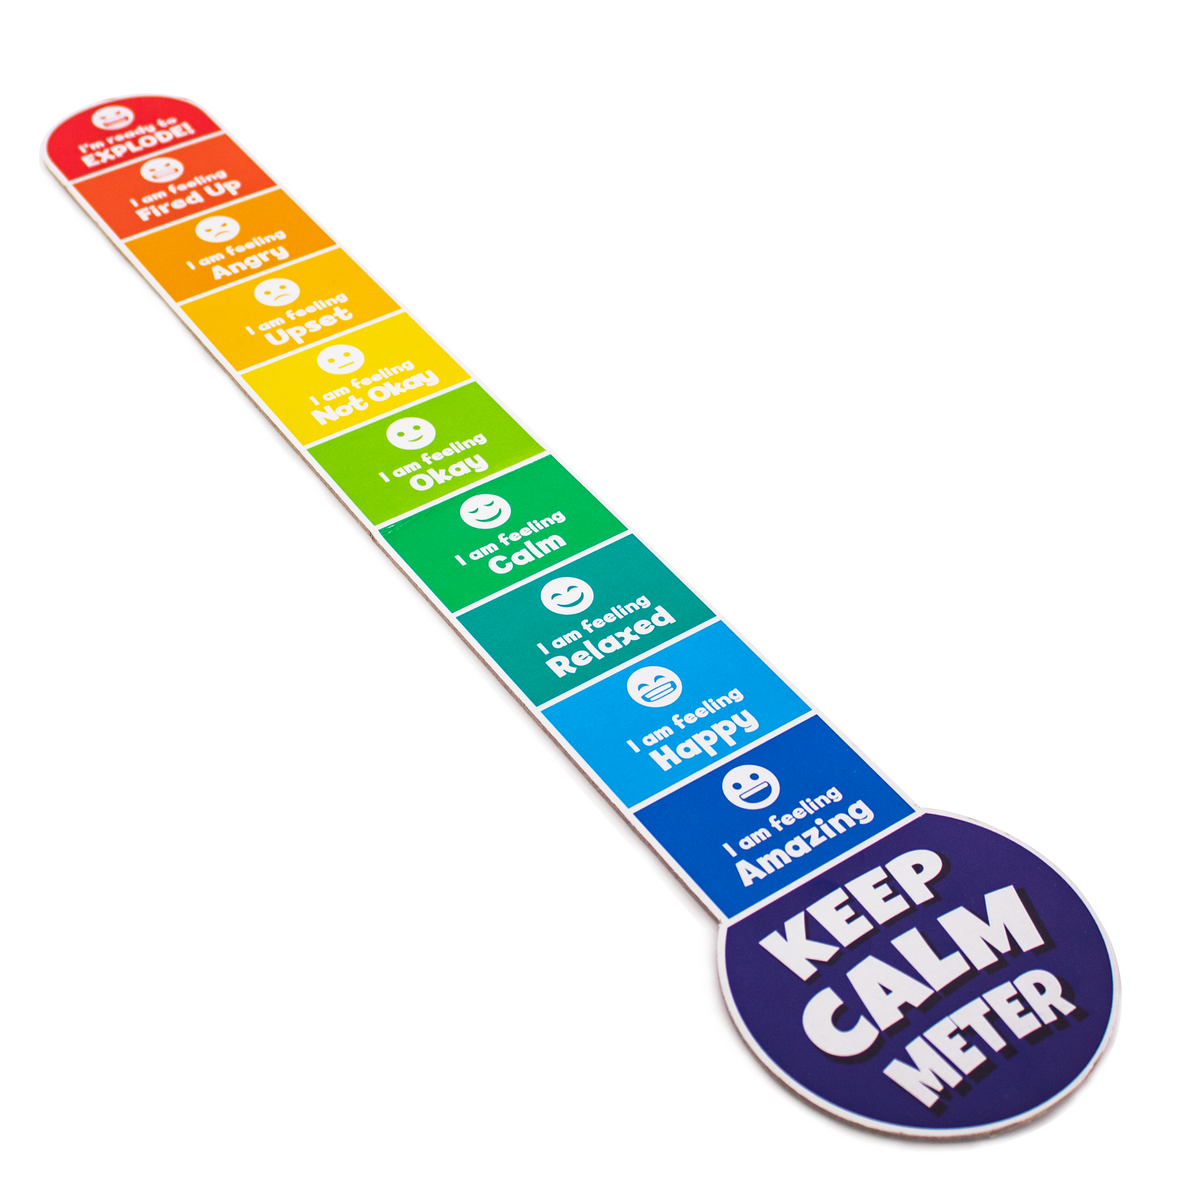 Junior Learning JL415 Keep Calm Meter thermometer game